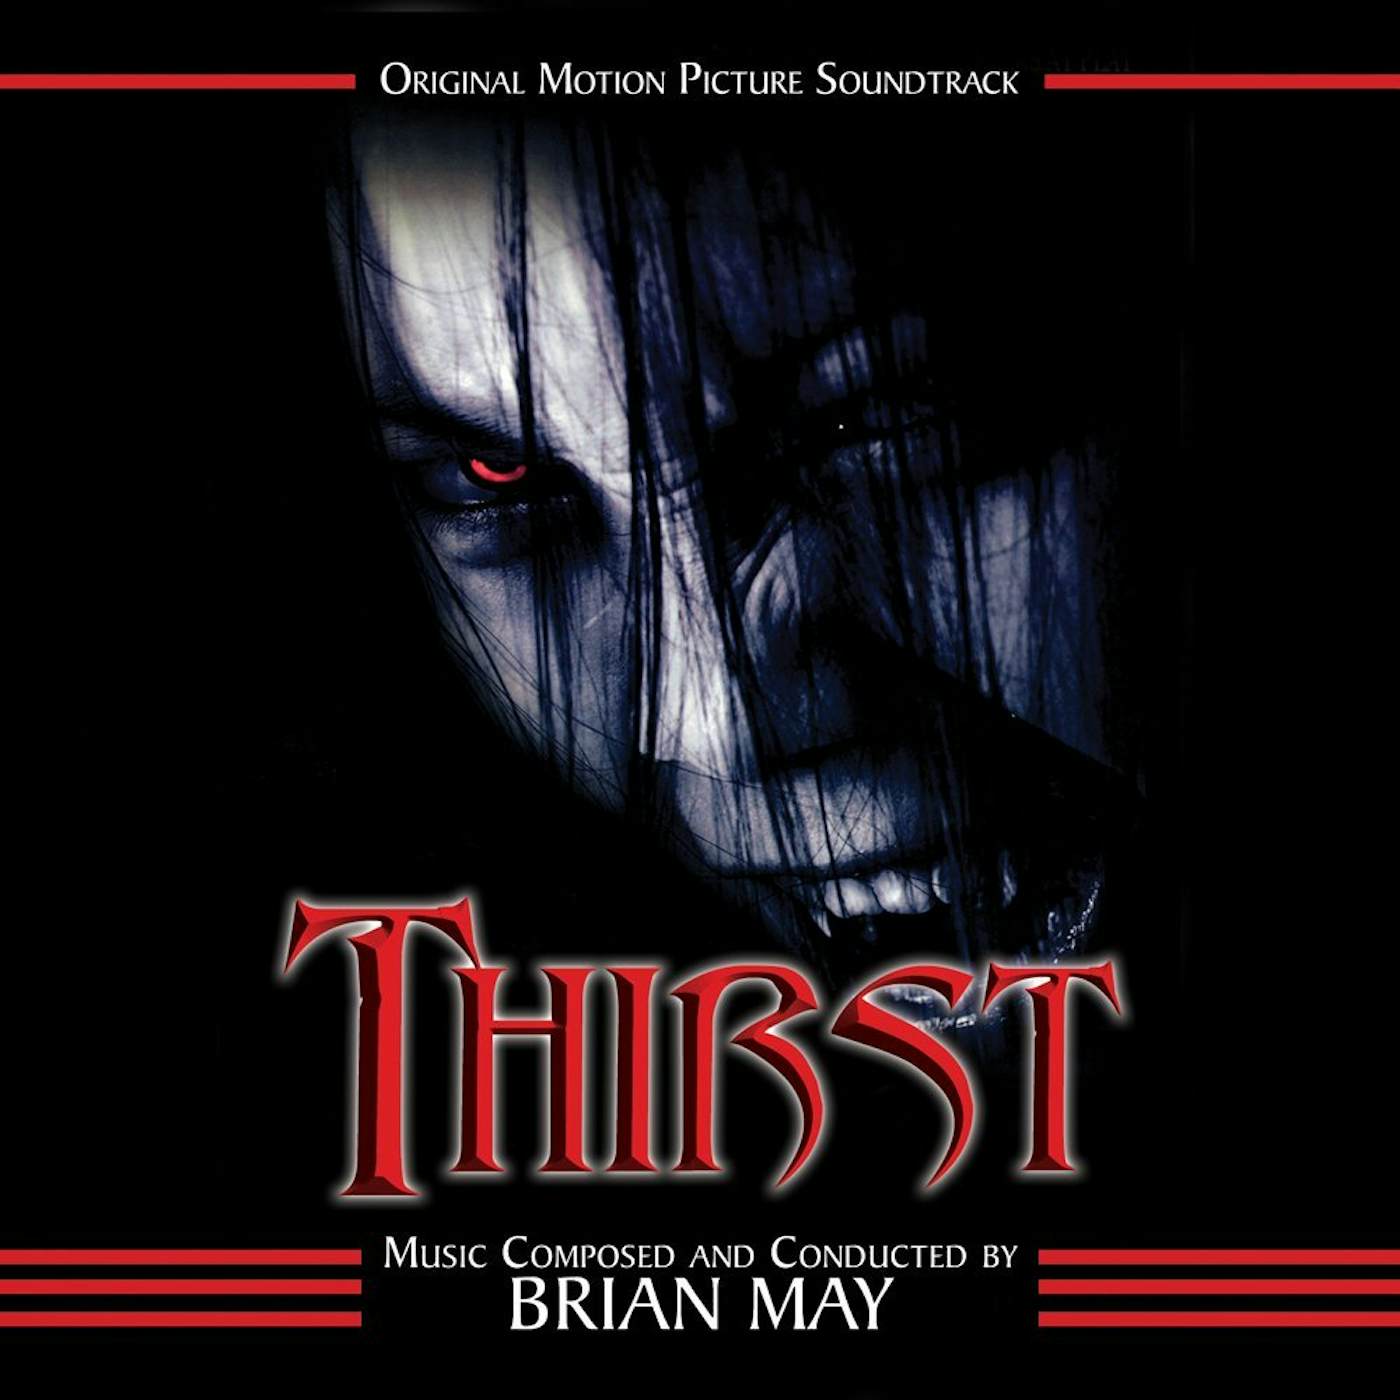 Brian May THIRST: ORIGINAL MOTION PICTURE SOUNDTRACK CD